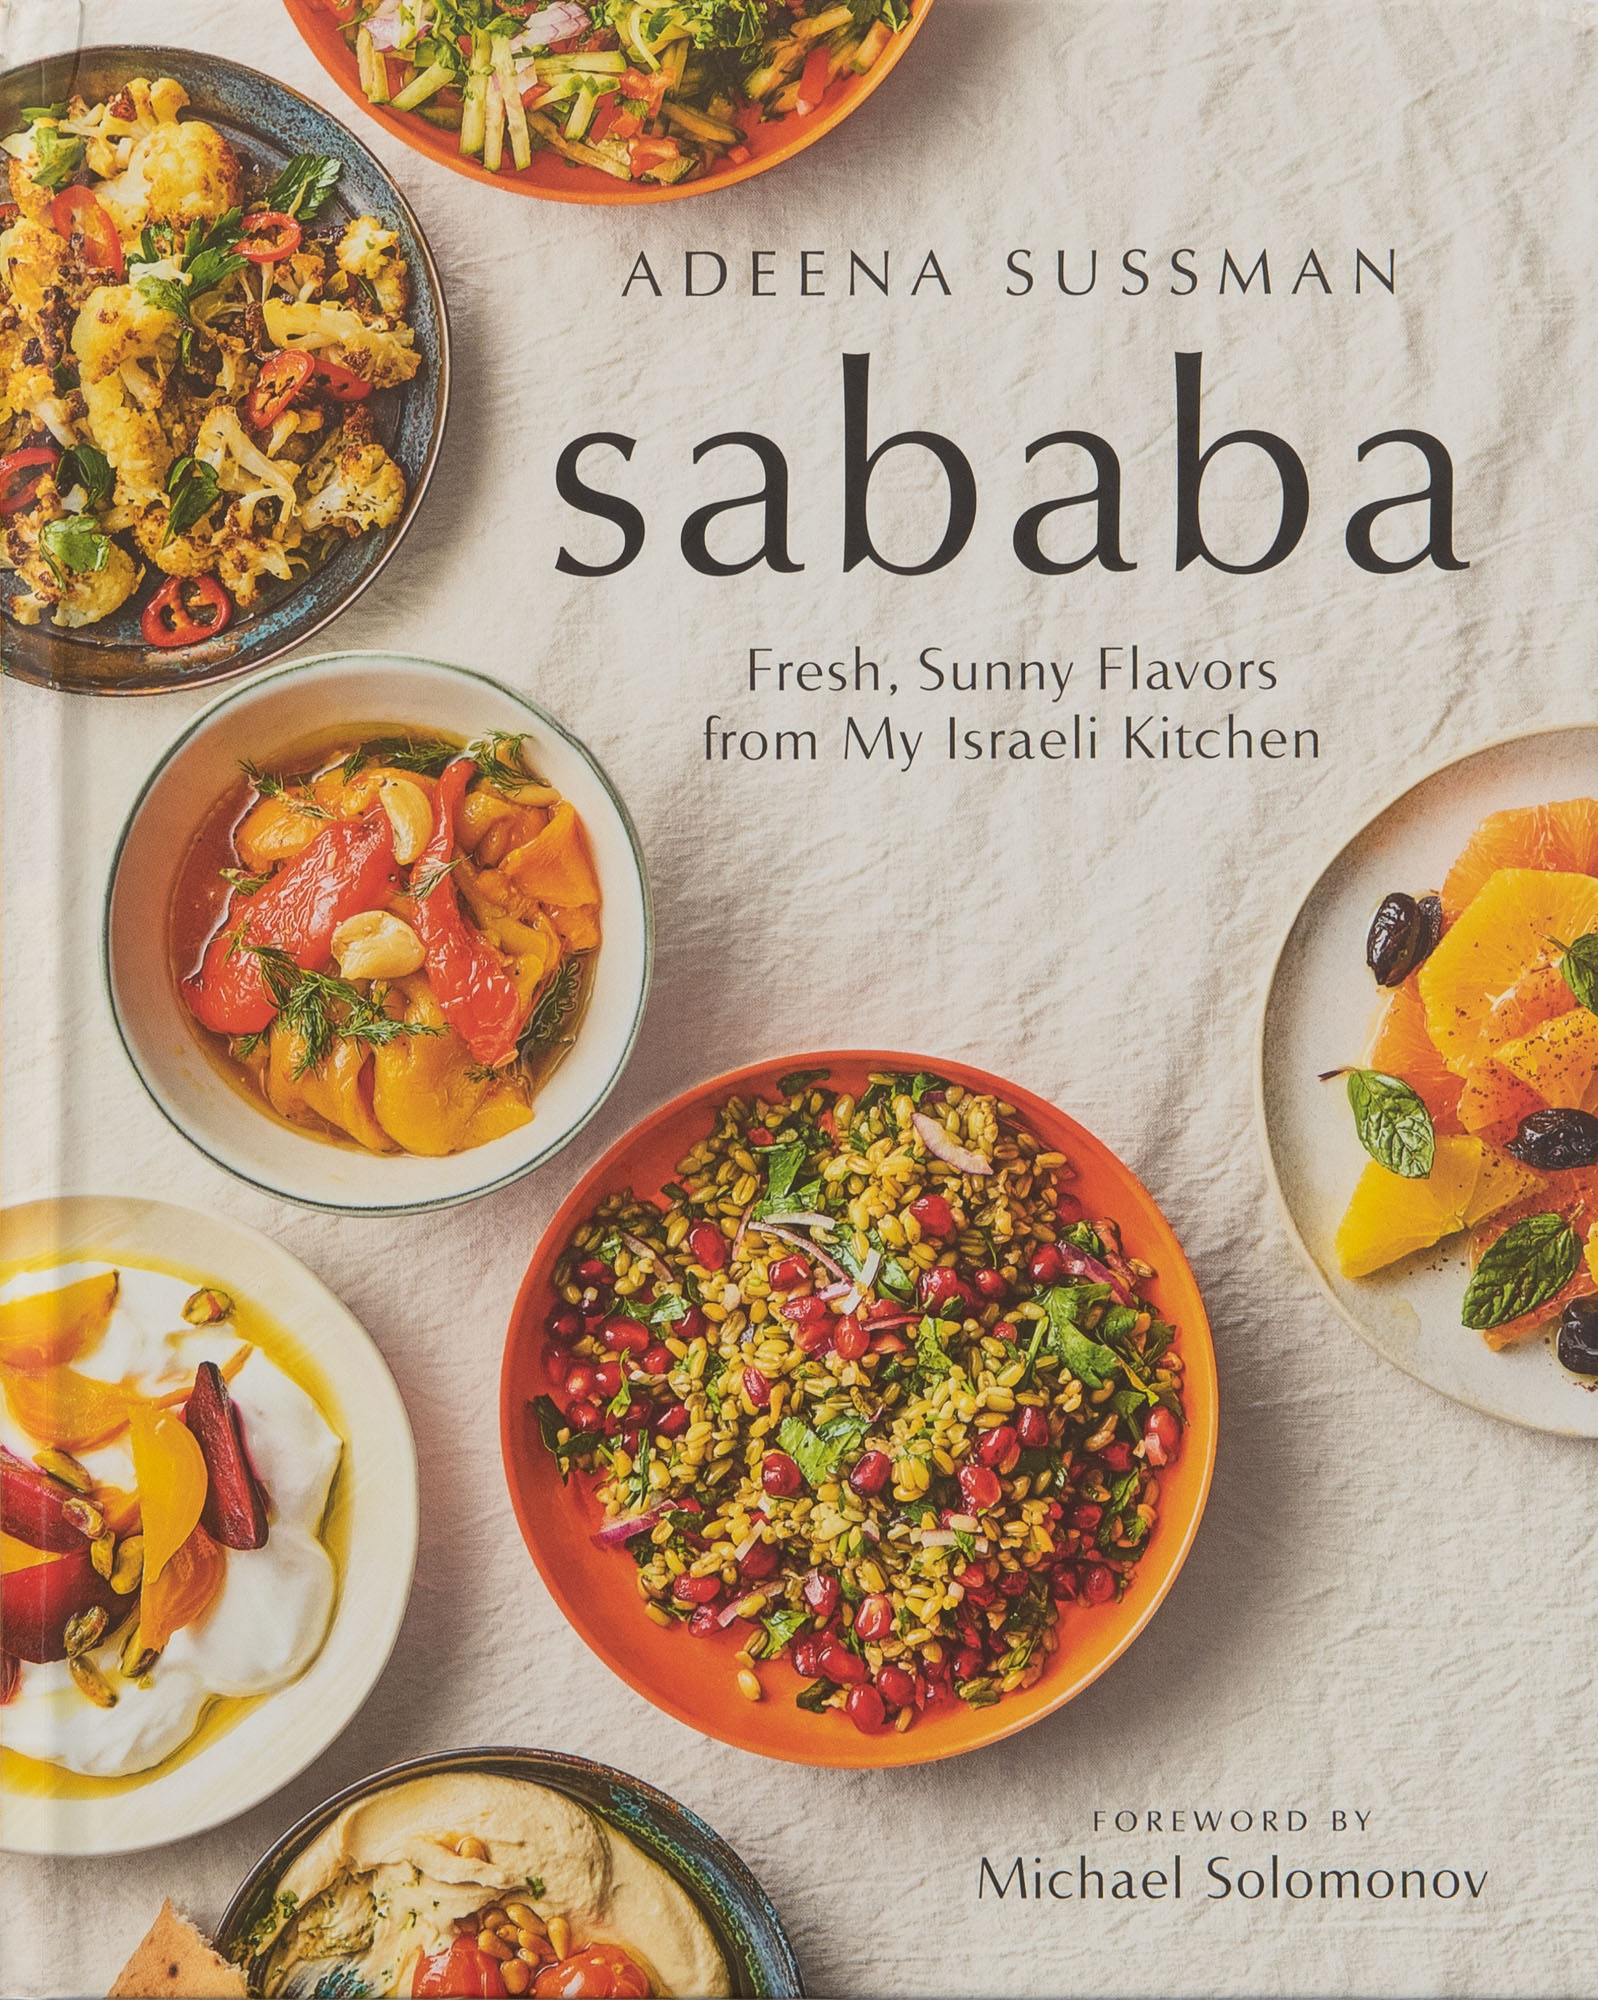 The cover of Israeli cookbook Sababa by Adeena Sussman